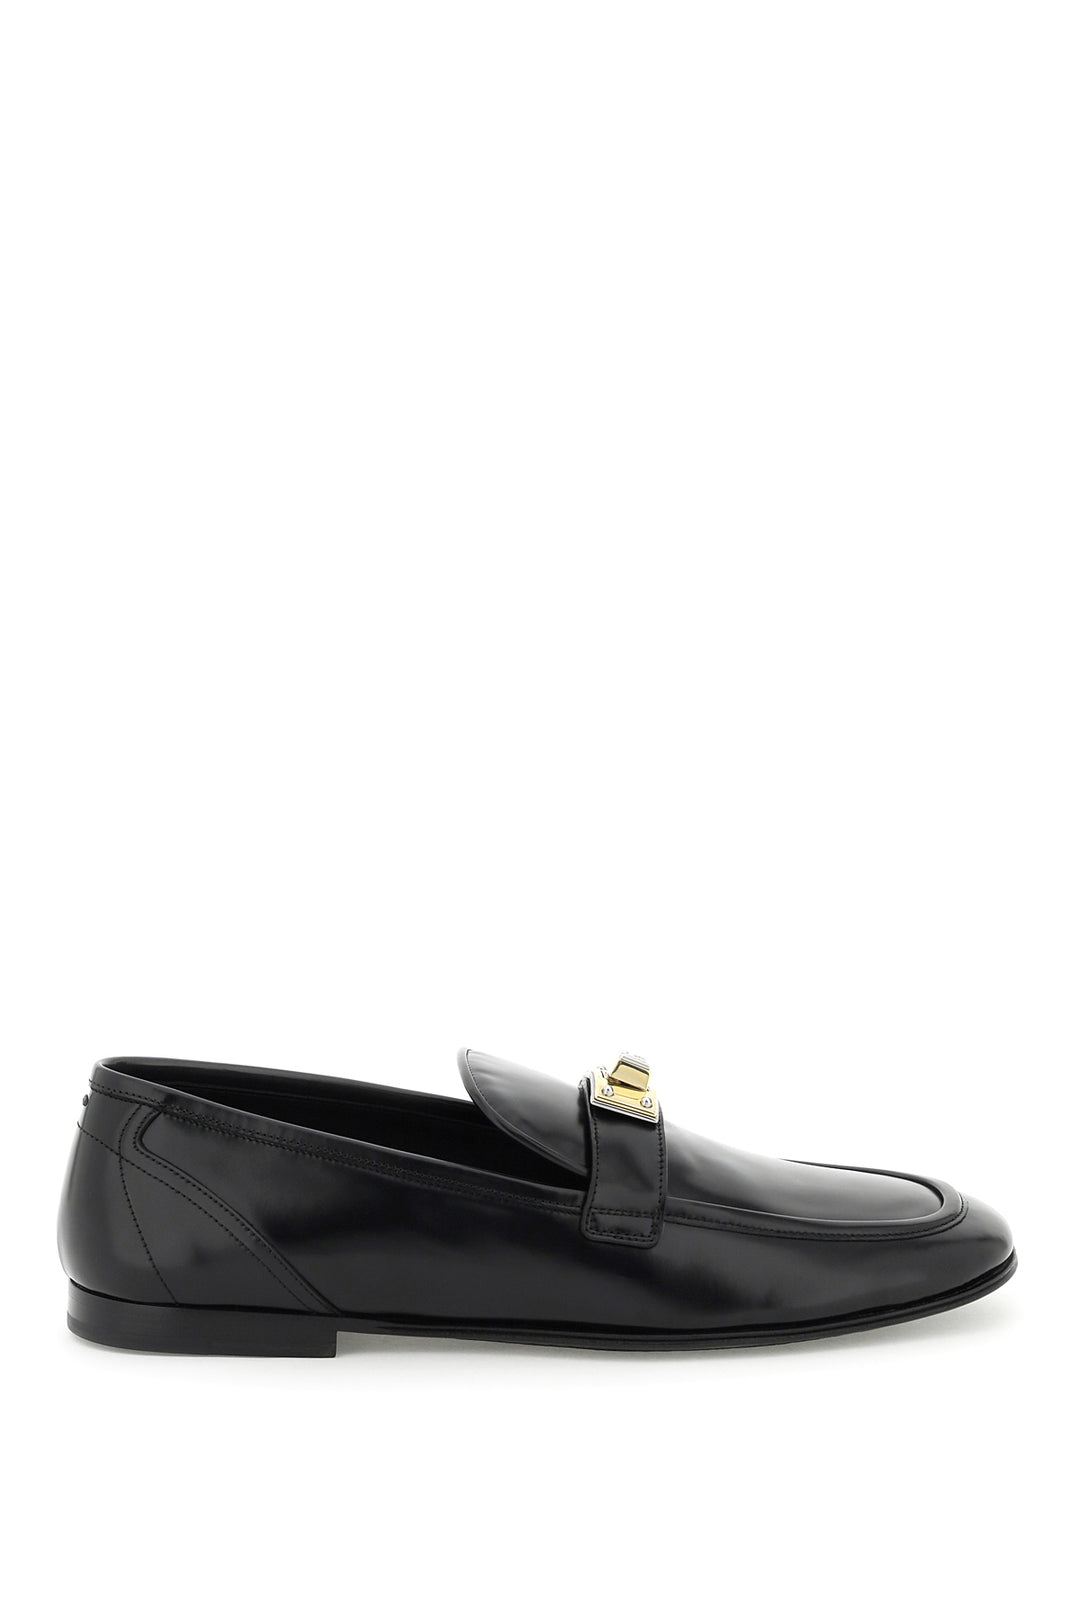 leather loafers-0